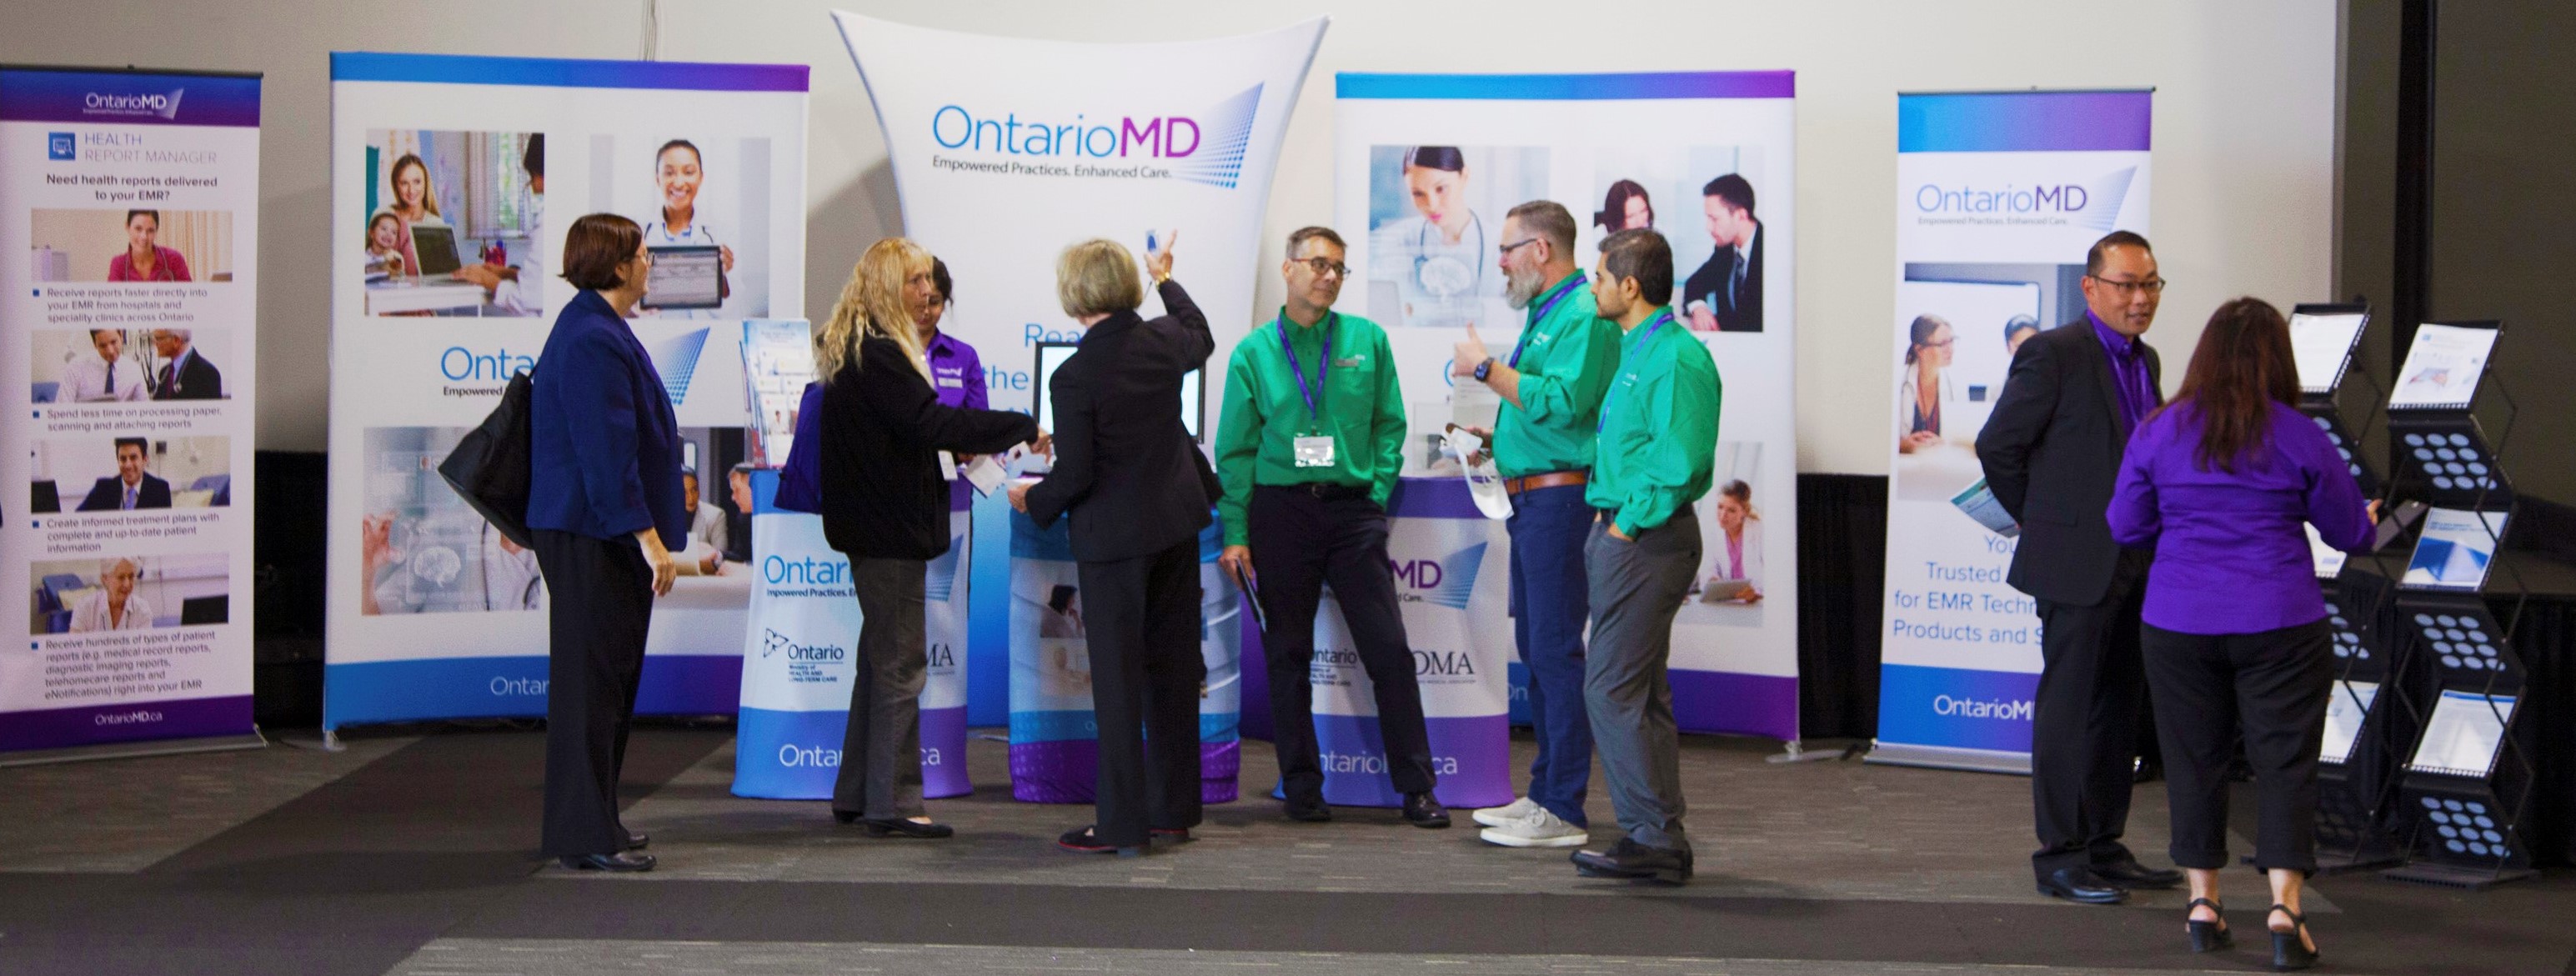 OntarioMD Booth